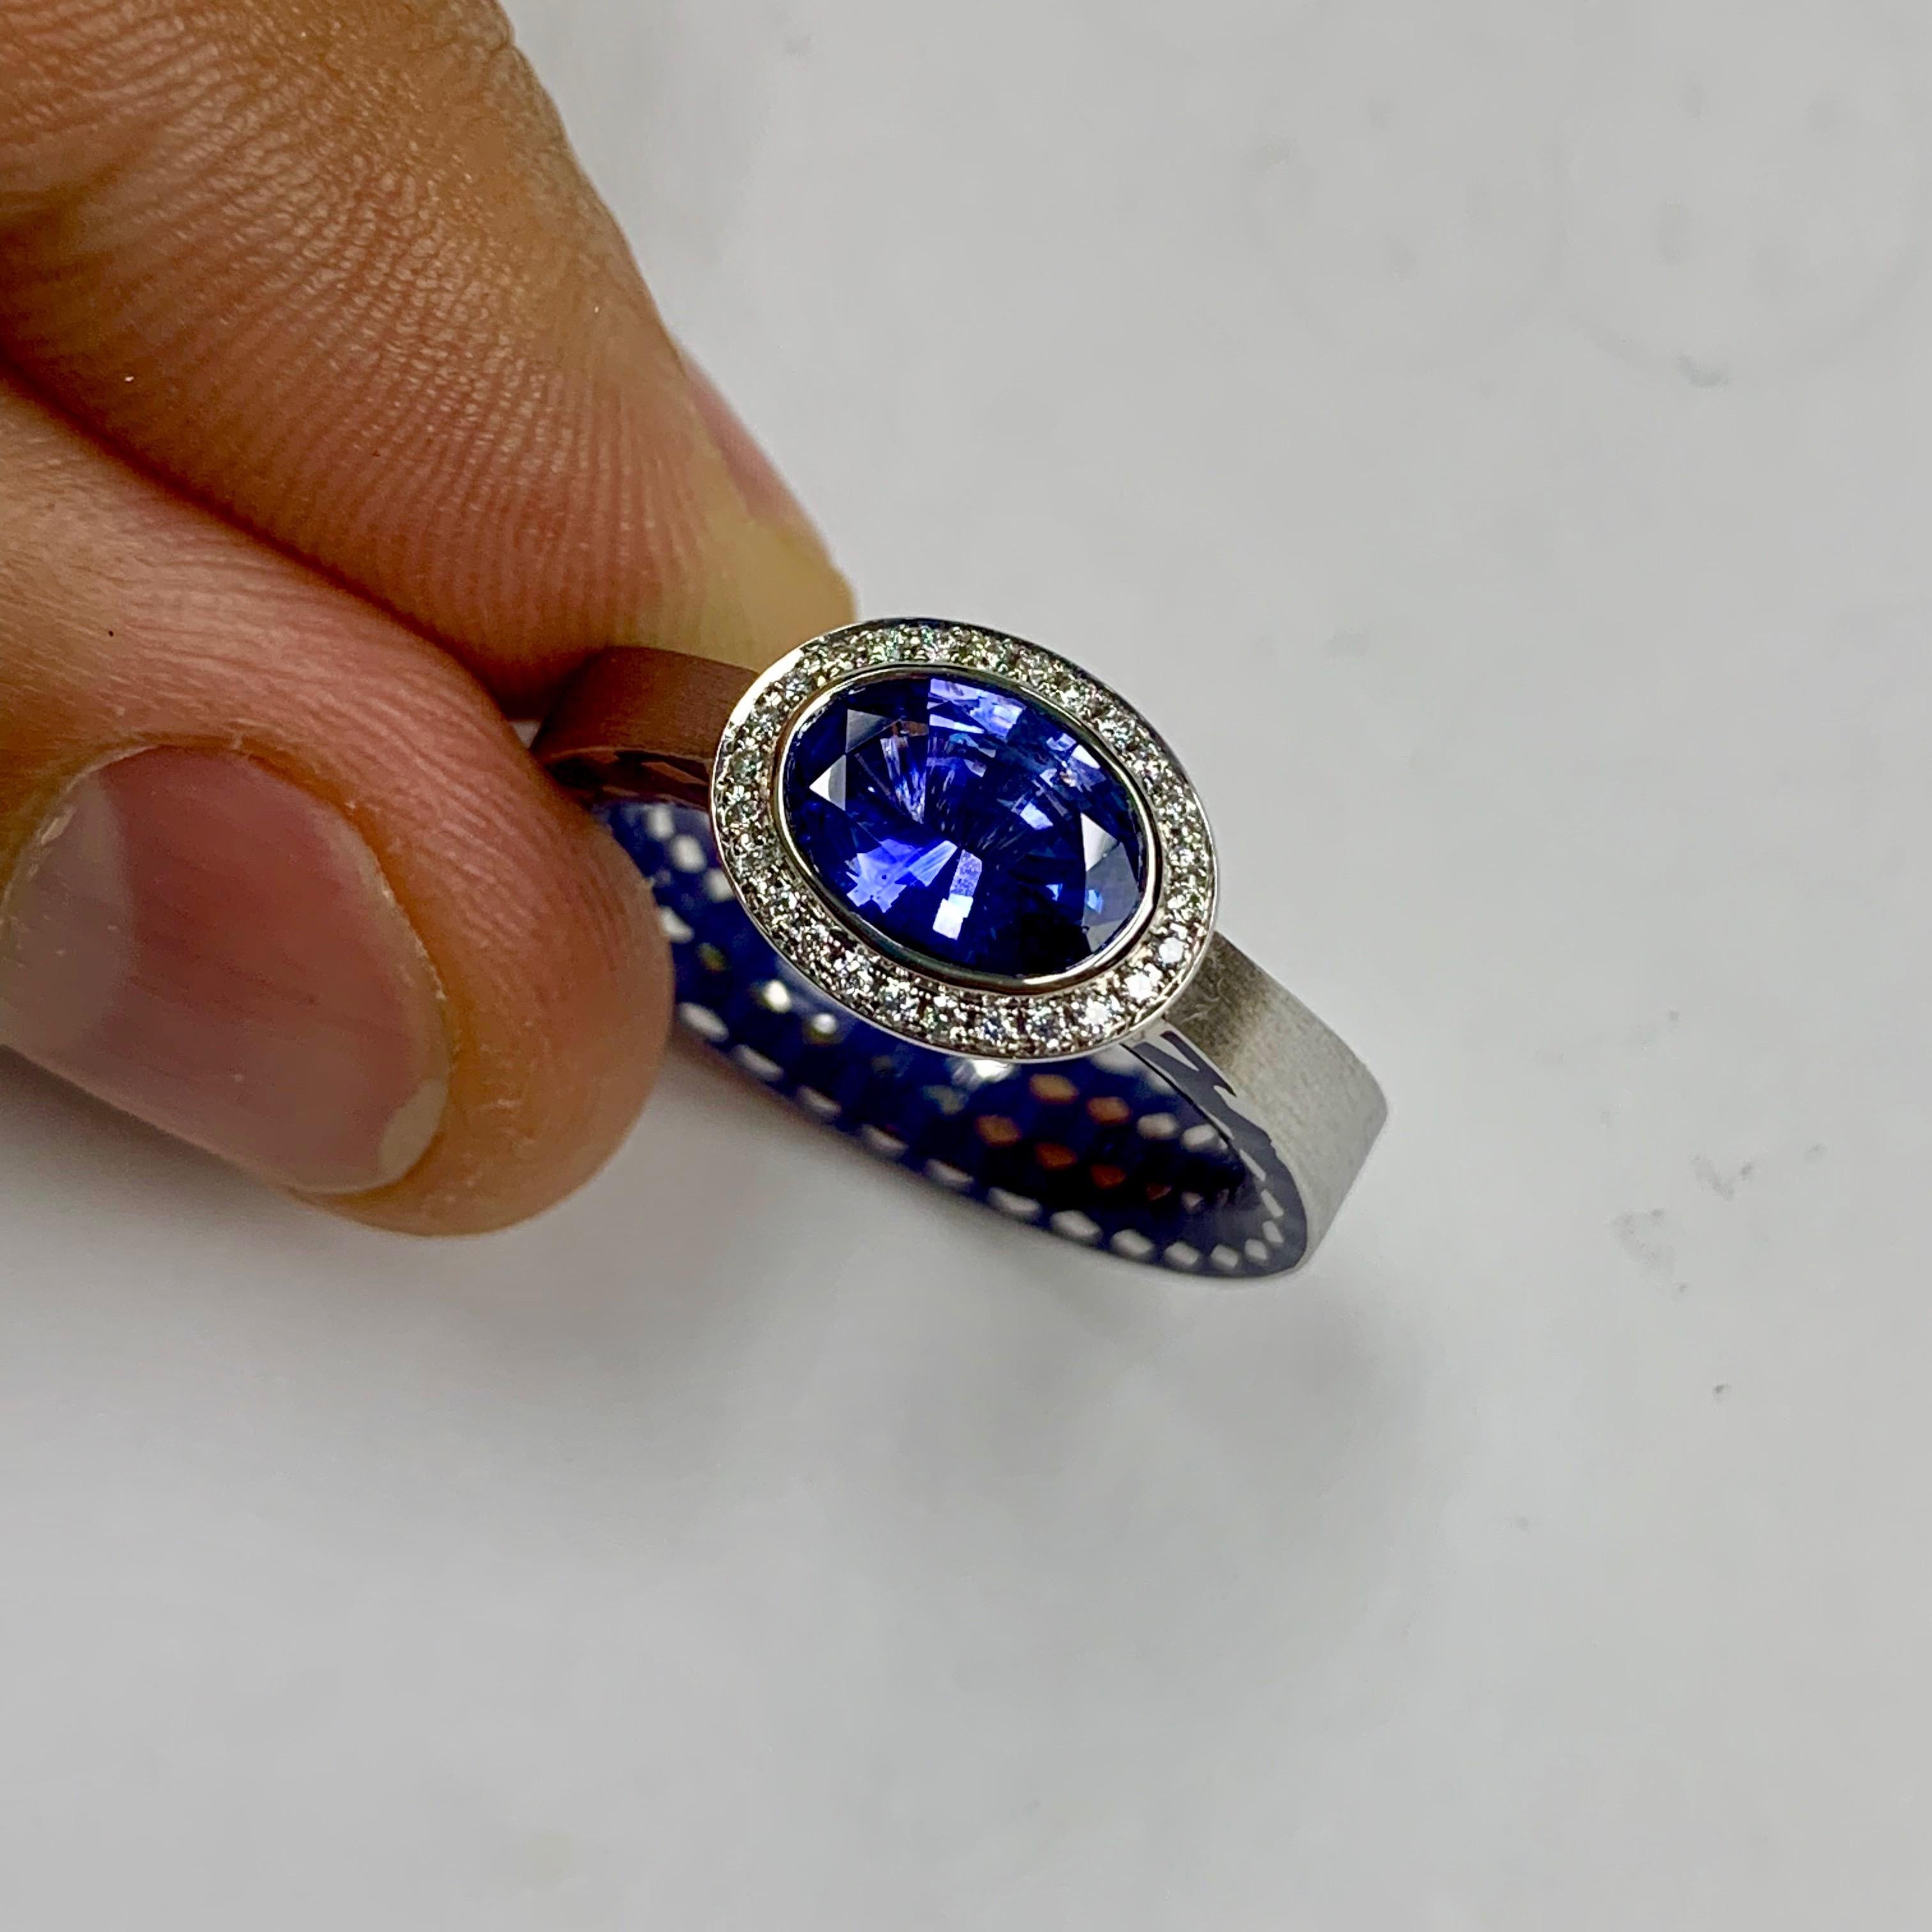 Blue Sapphire 1.91ct Diamonds Enamel 18 Karat White Gold Kaleidoscope Ring

Please take a look at one of our trade mark texture in Kaleidoscope Collection - 